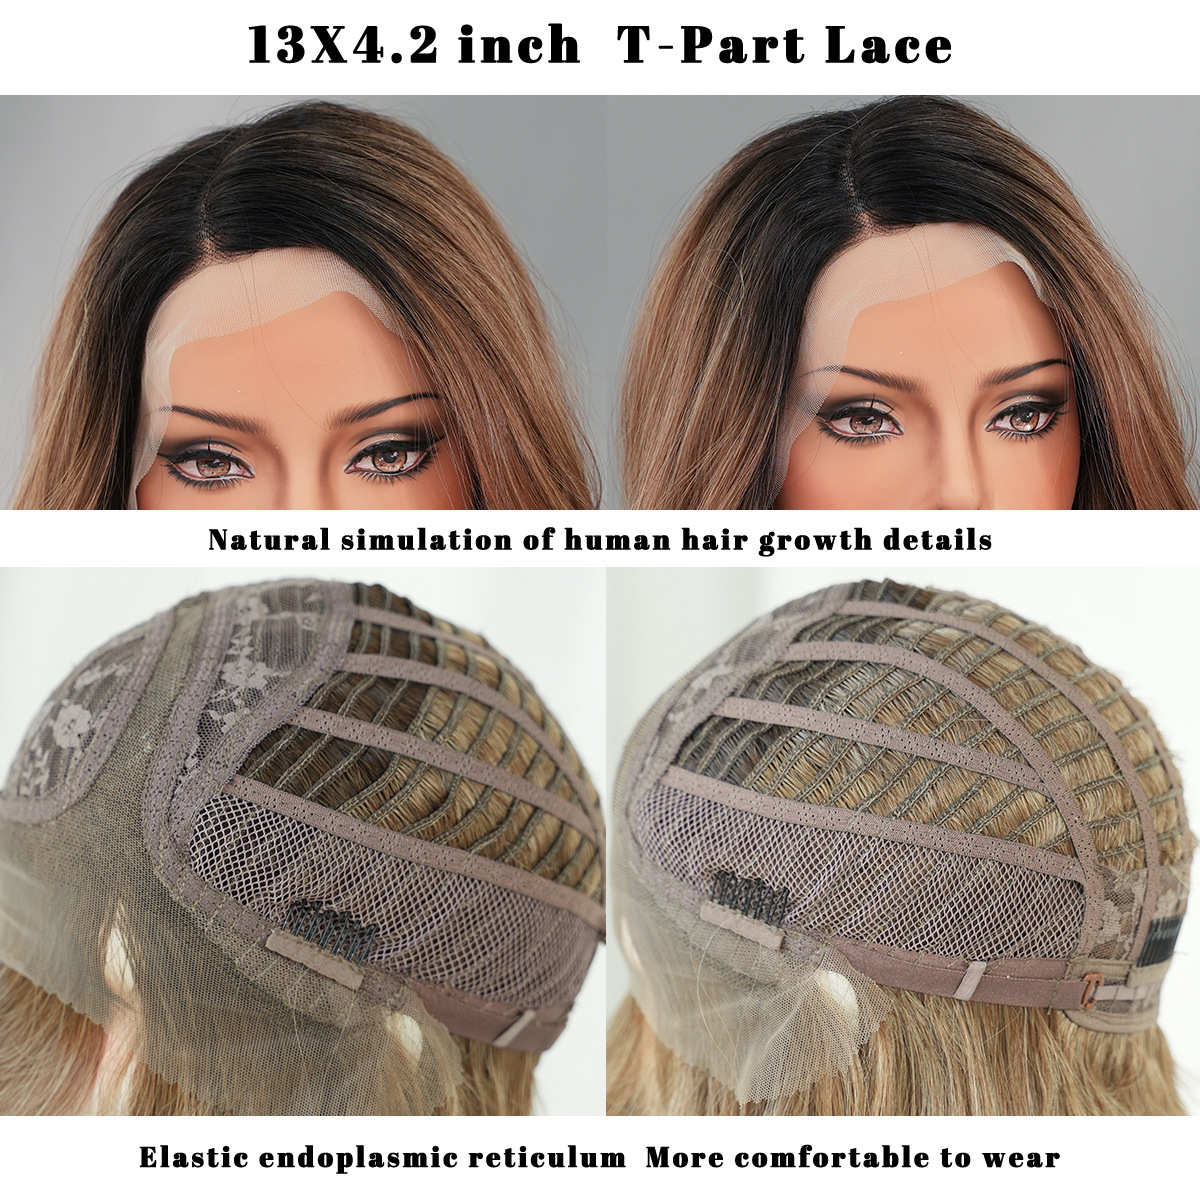 A wig with wavy mocha brown highlighted synthetic hair, styled with a side split and fiber T-part lace